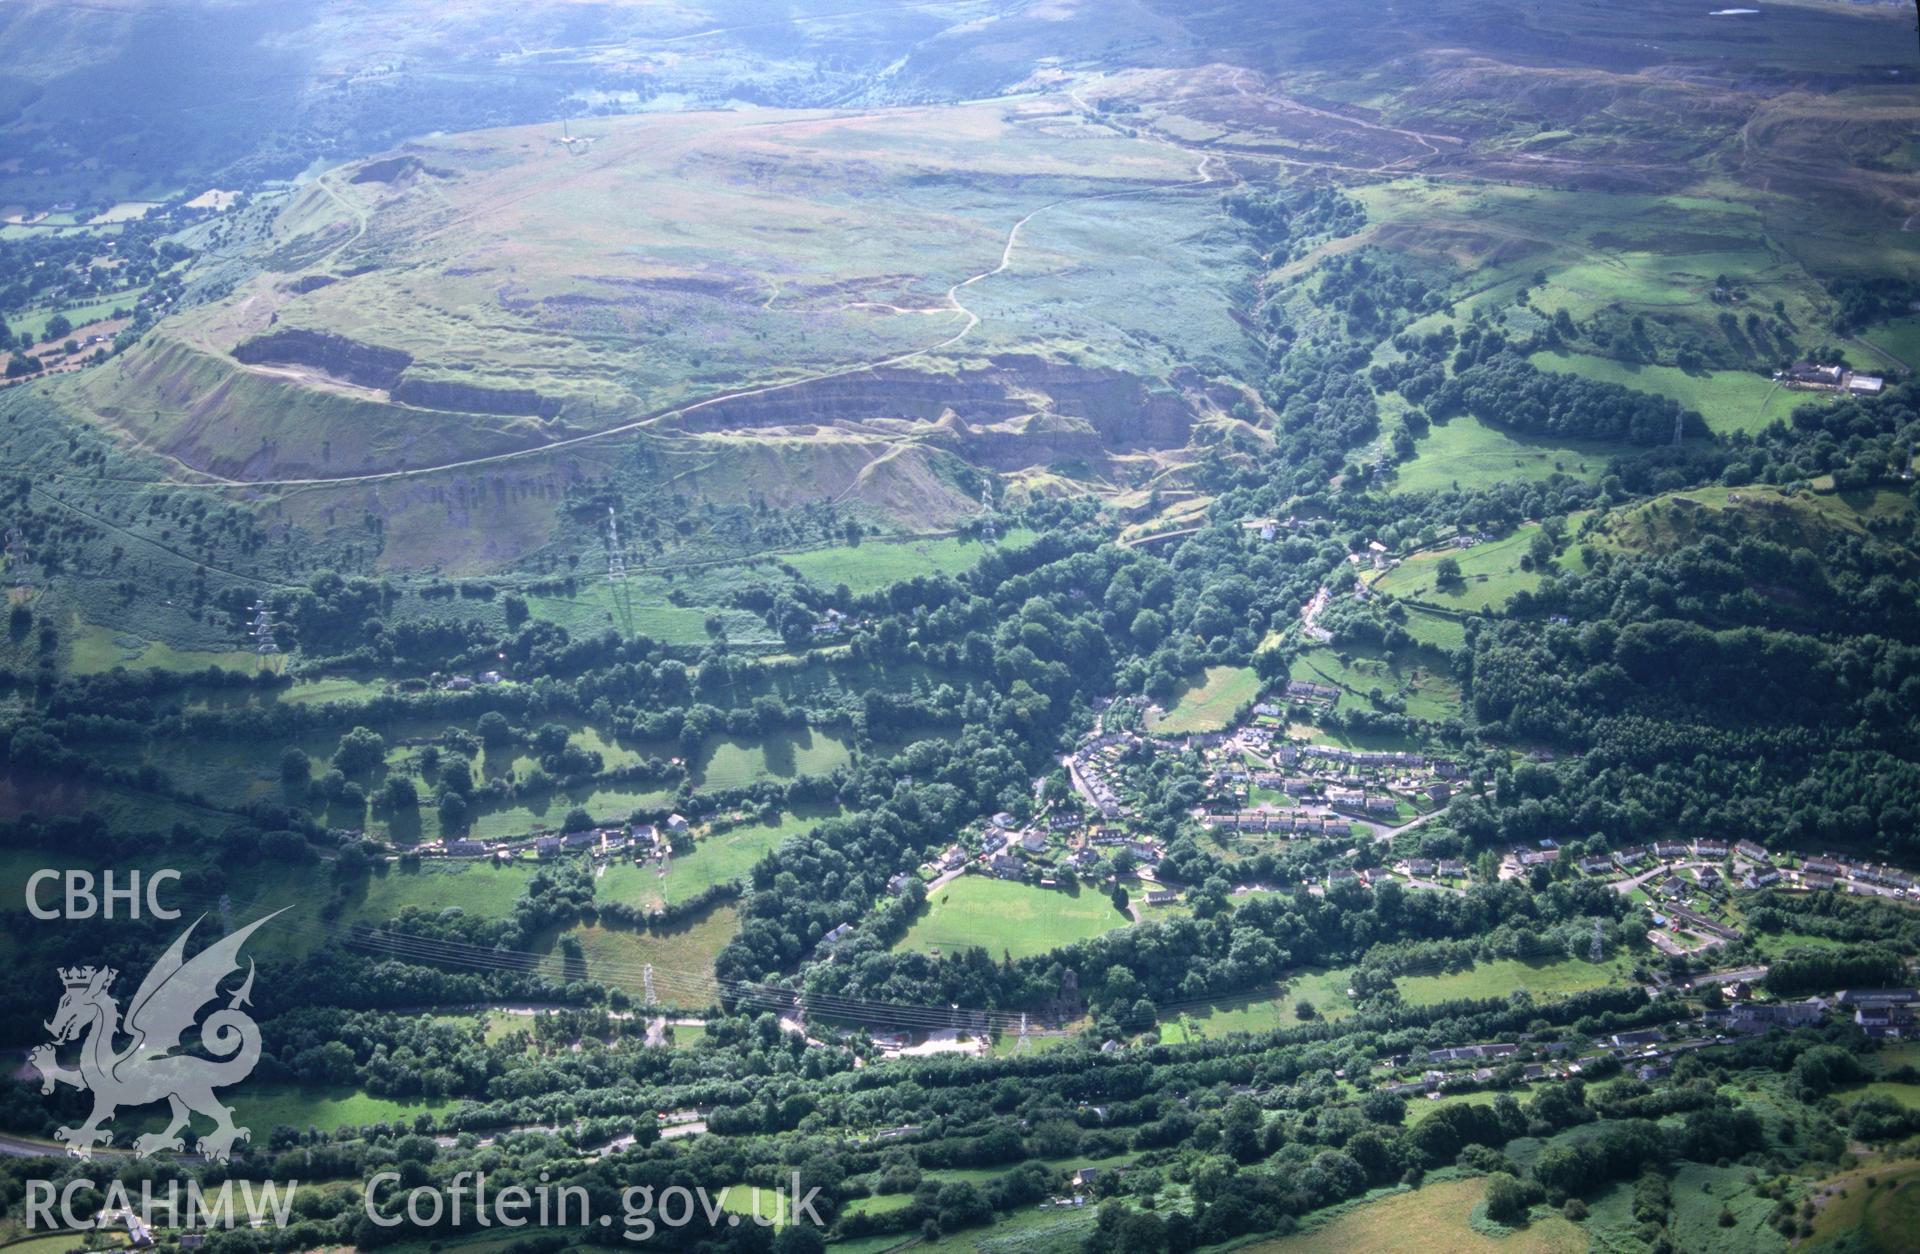 Slide of RCAHMW colour oblique aerial photograph of Clydach Vale, taken by T.G. Driver, 24/7/1999.